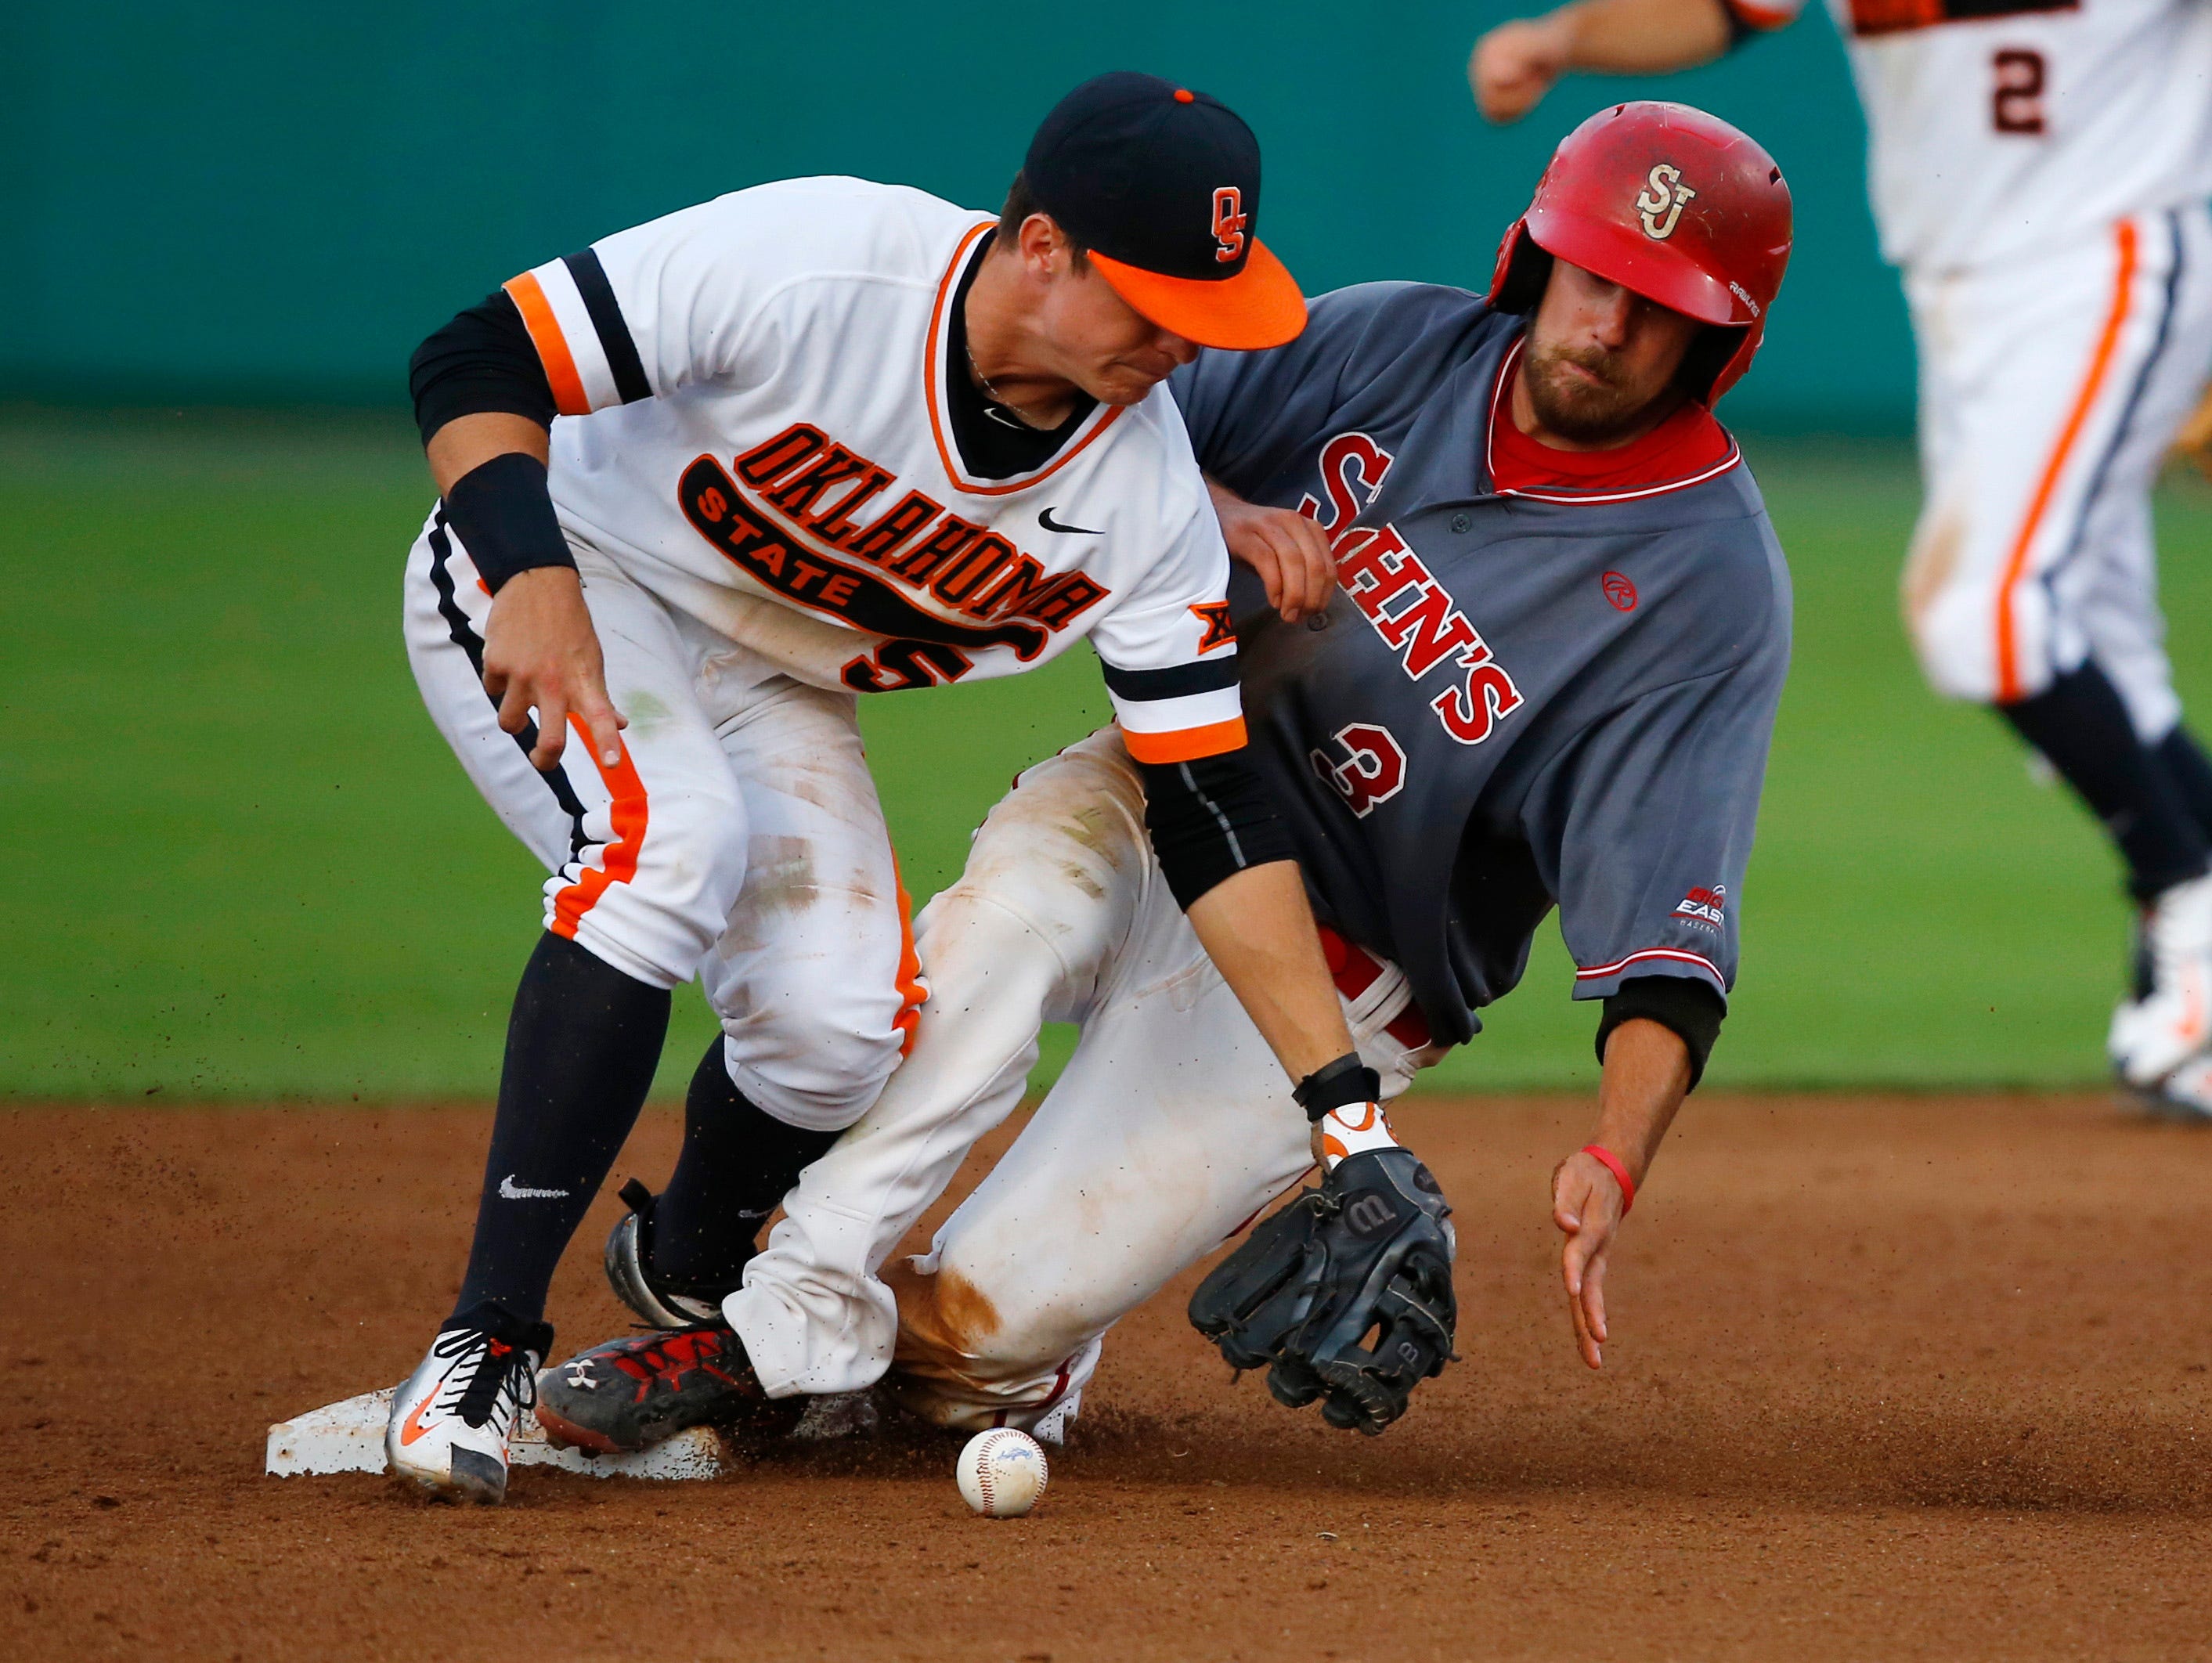 Robert Wayman (3) of St. John's slides safely into second base as Oklahoma State shortstop Donnie Walton (5) takes the throw during their regional game in Stillwater, Okla., on Sunday.